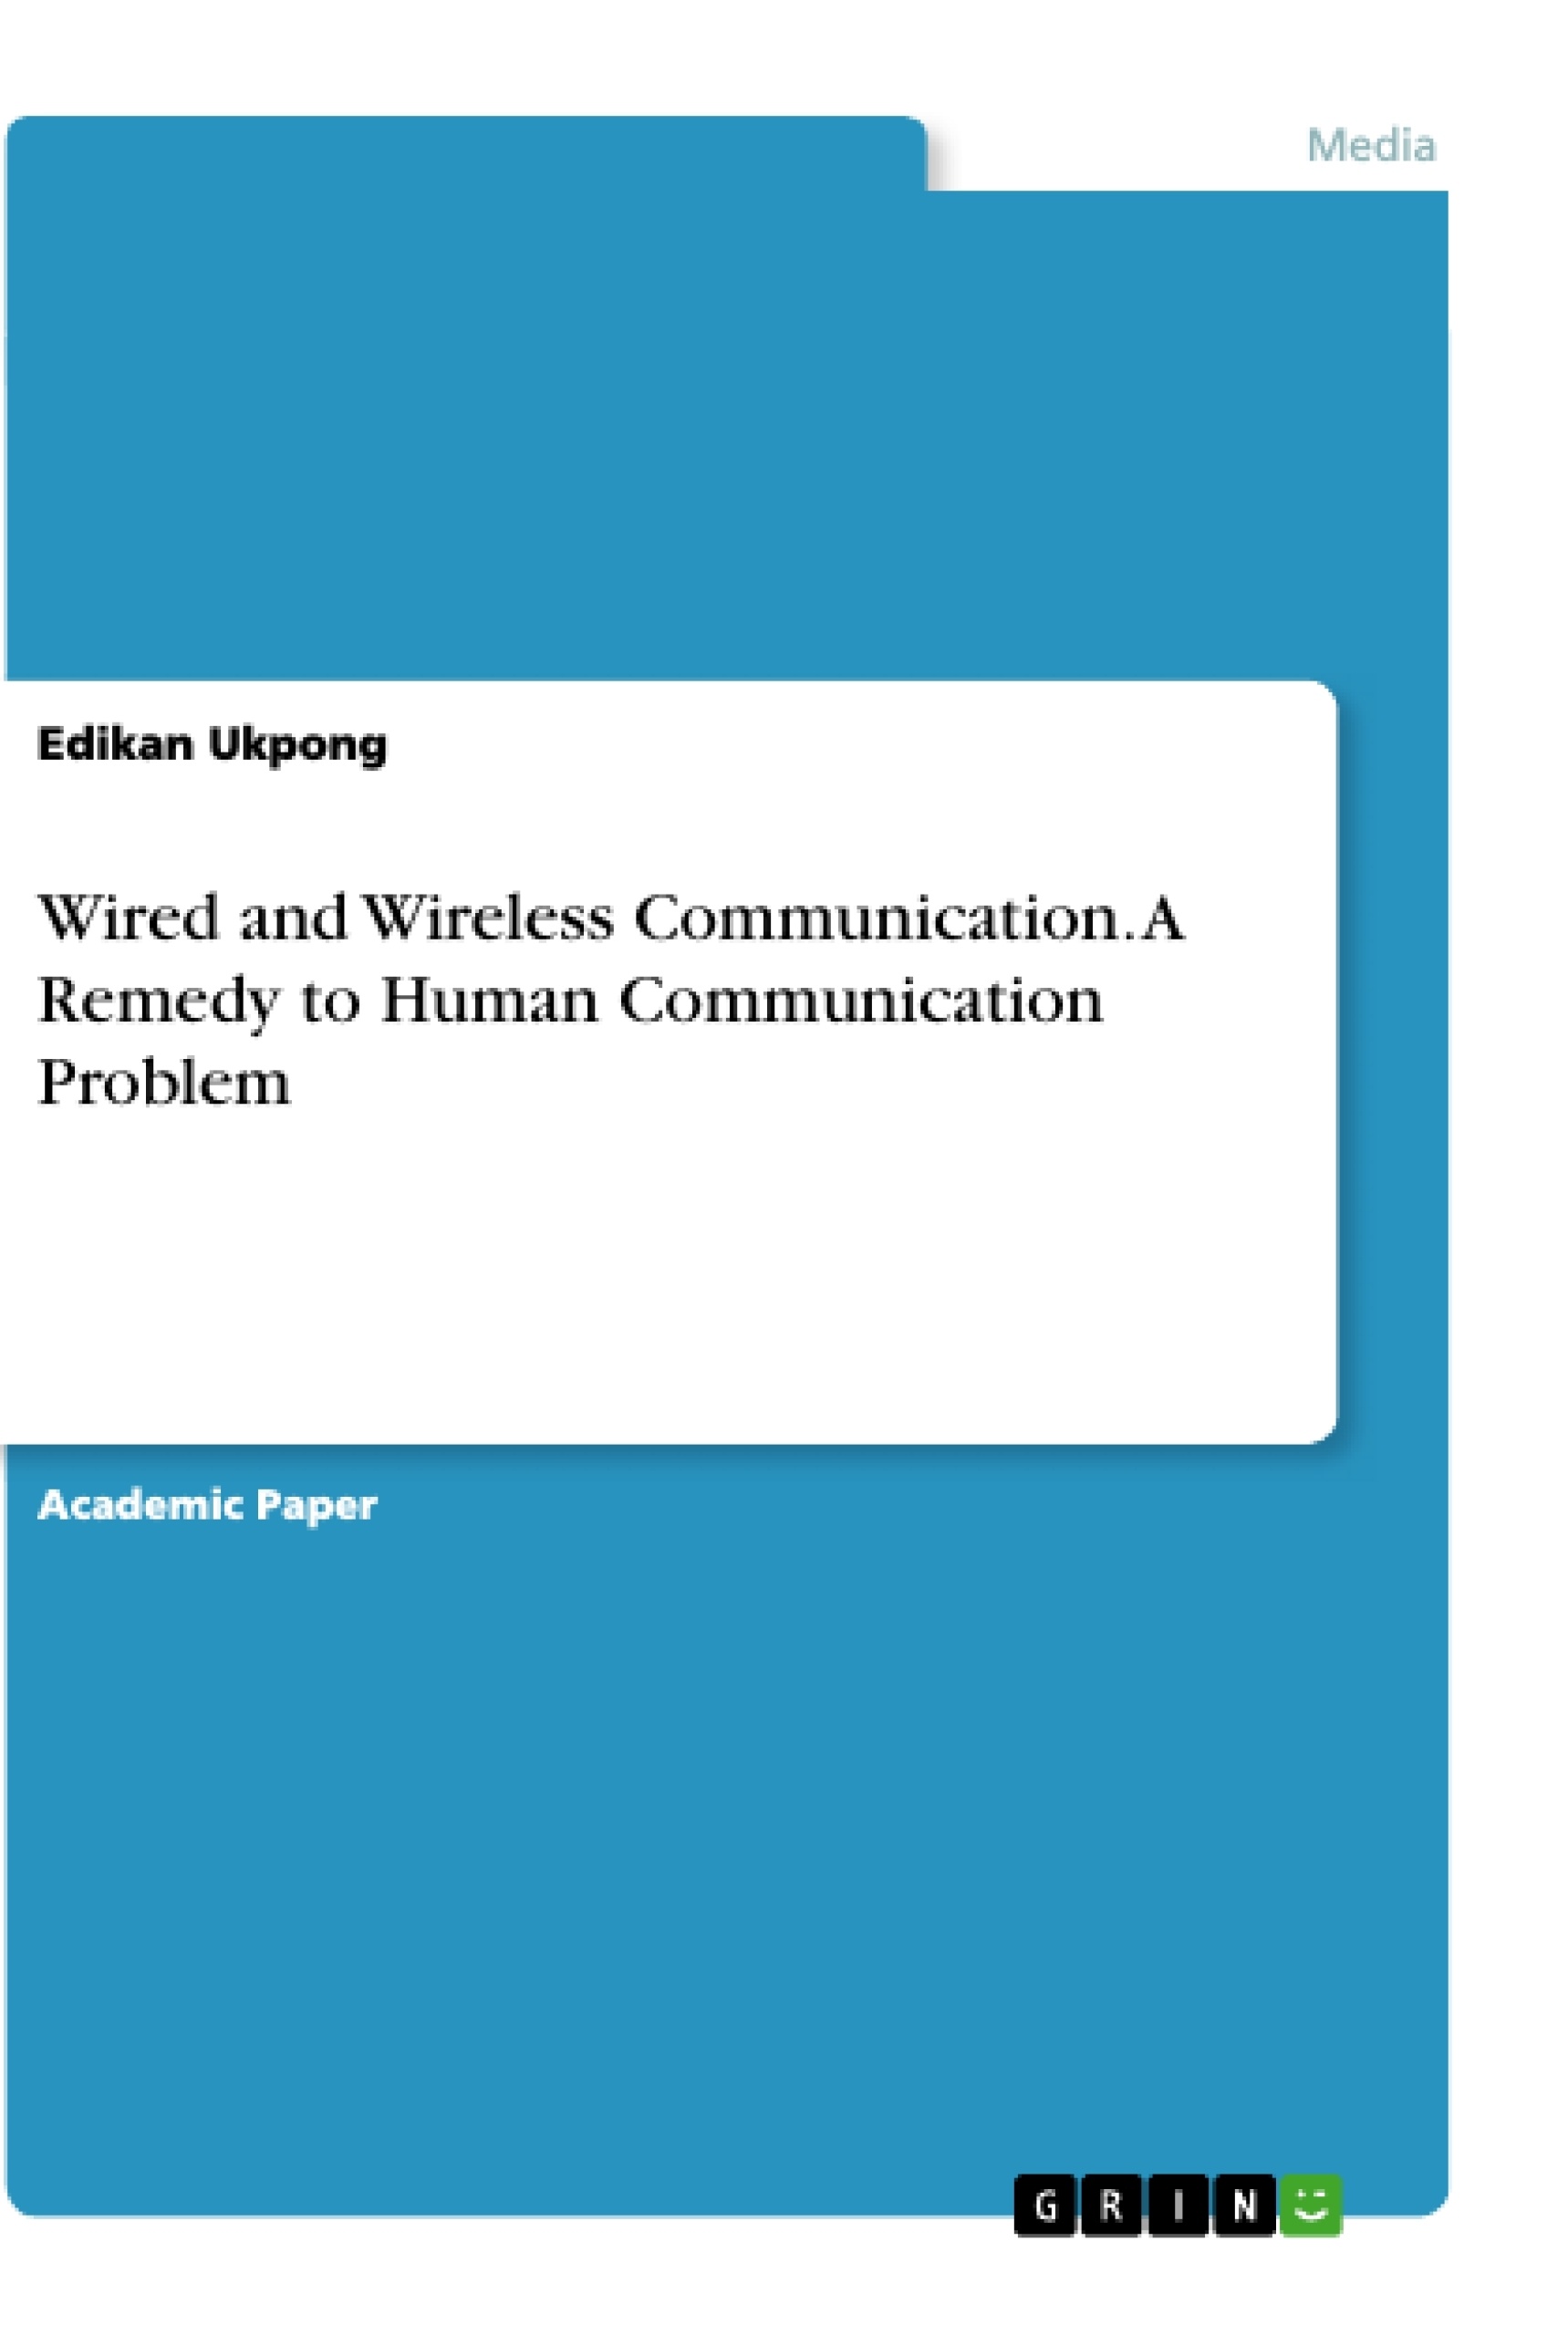 Titre: Wired and Wireless Communication. A Remedy to Human Communication Problem